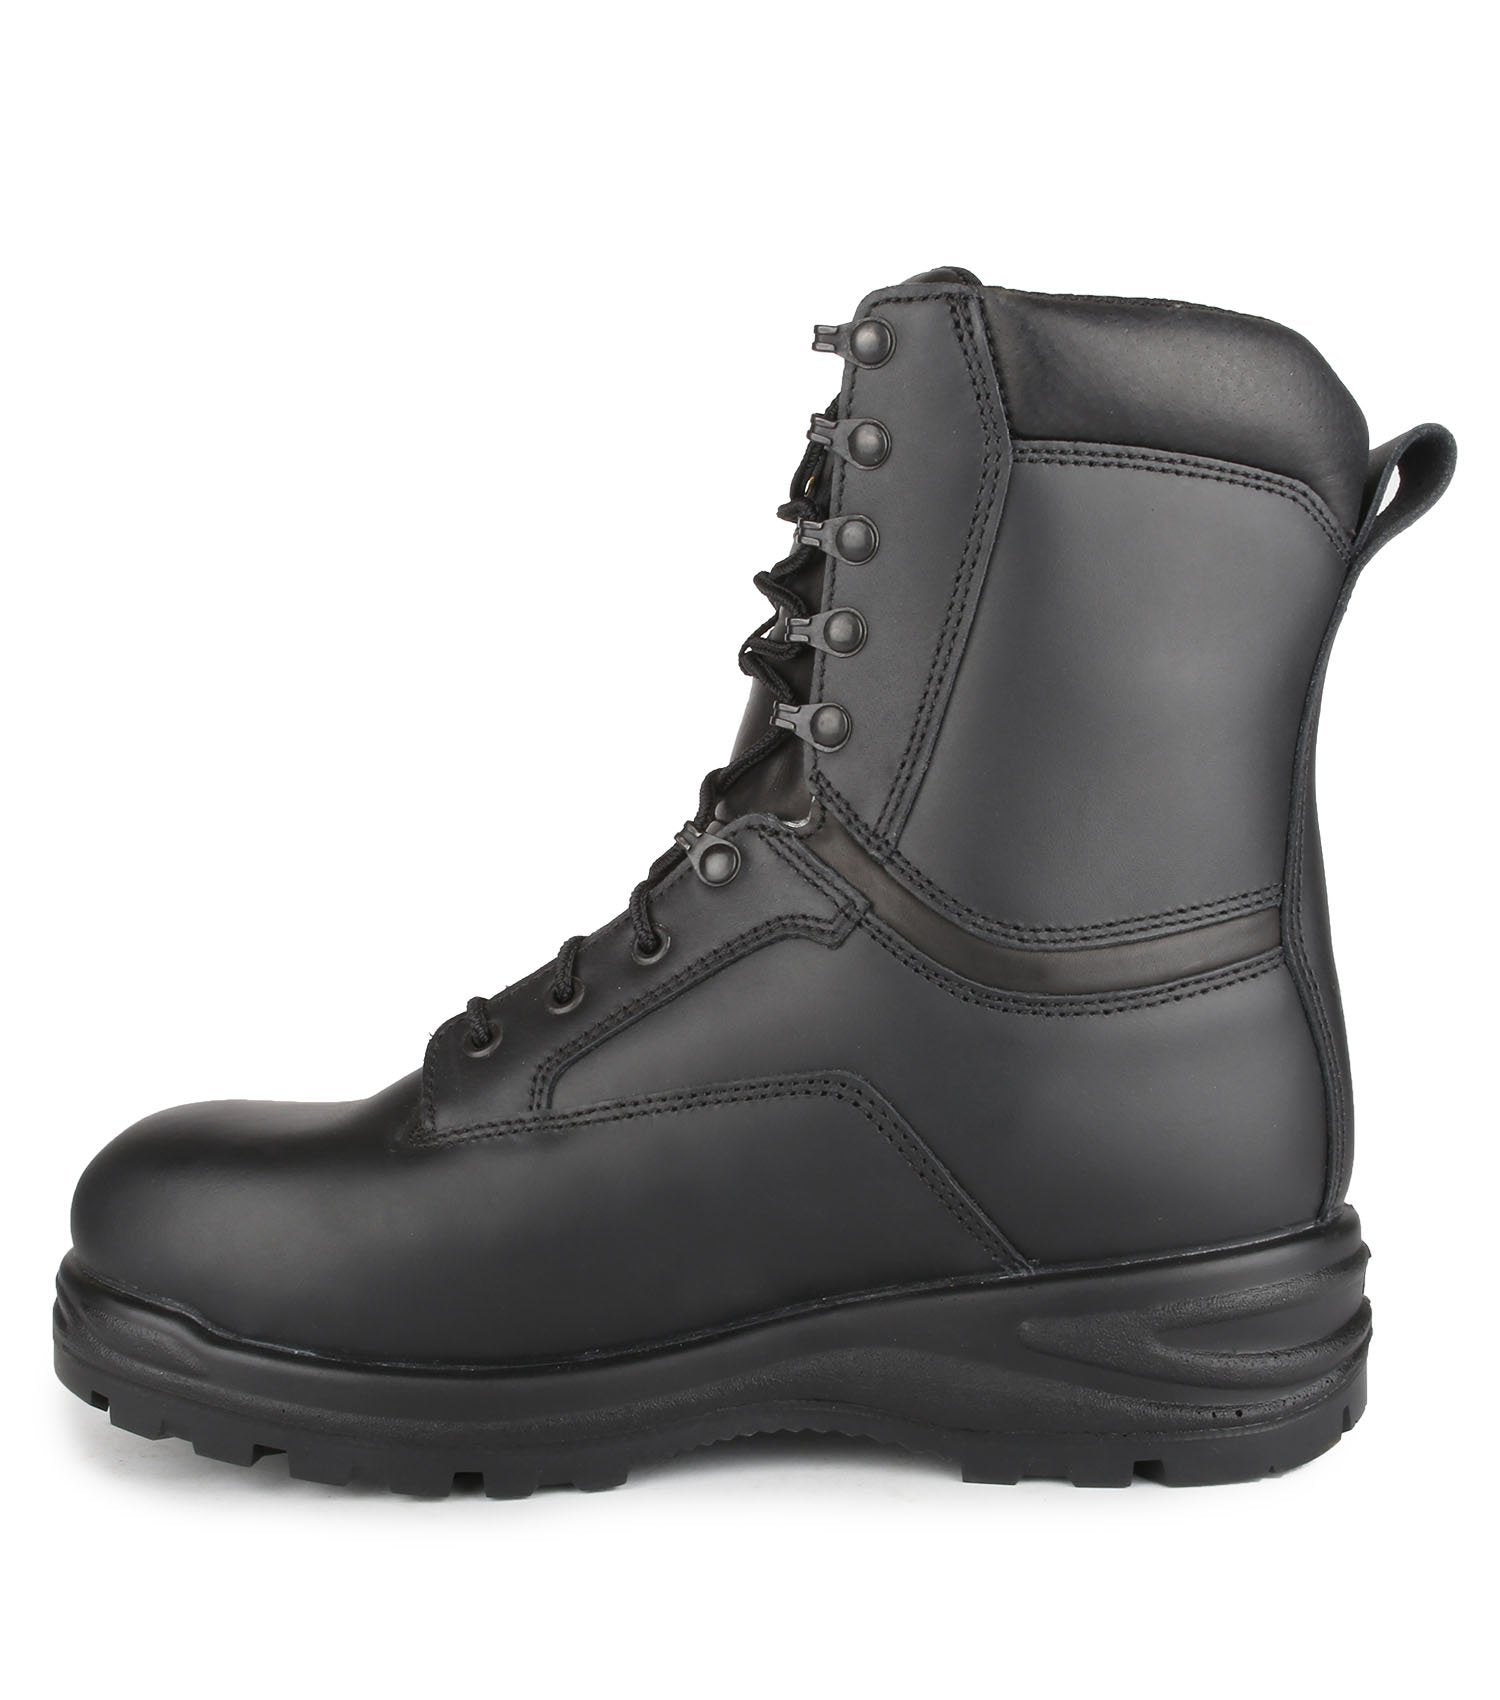 STC ER 8" Winter Tactical Boots  | Black | Sizes 3.5 - 14 Work Boots - Cleanflow